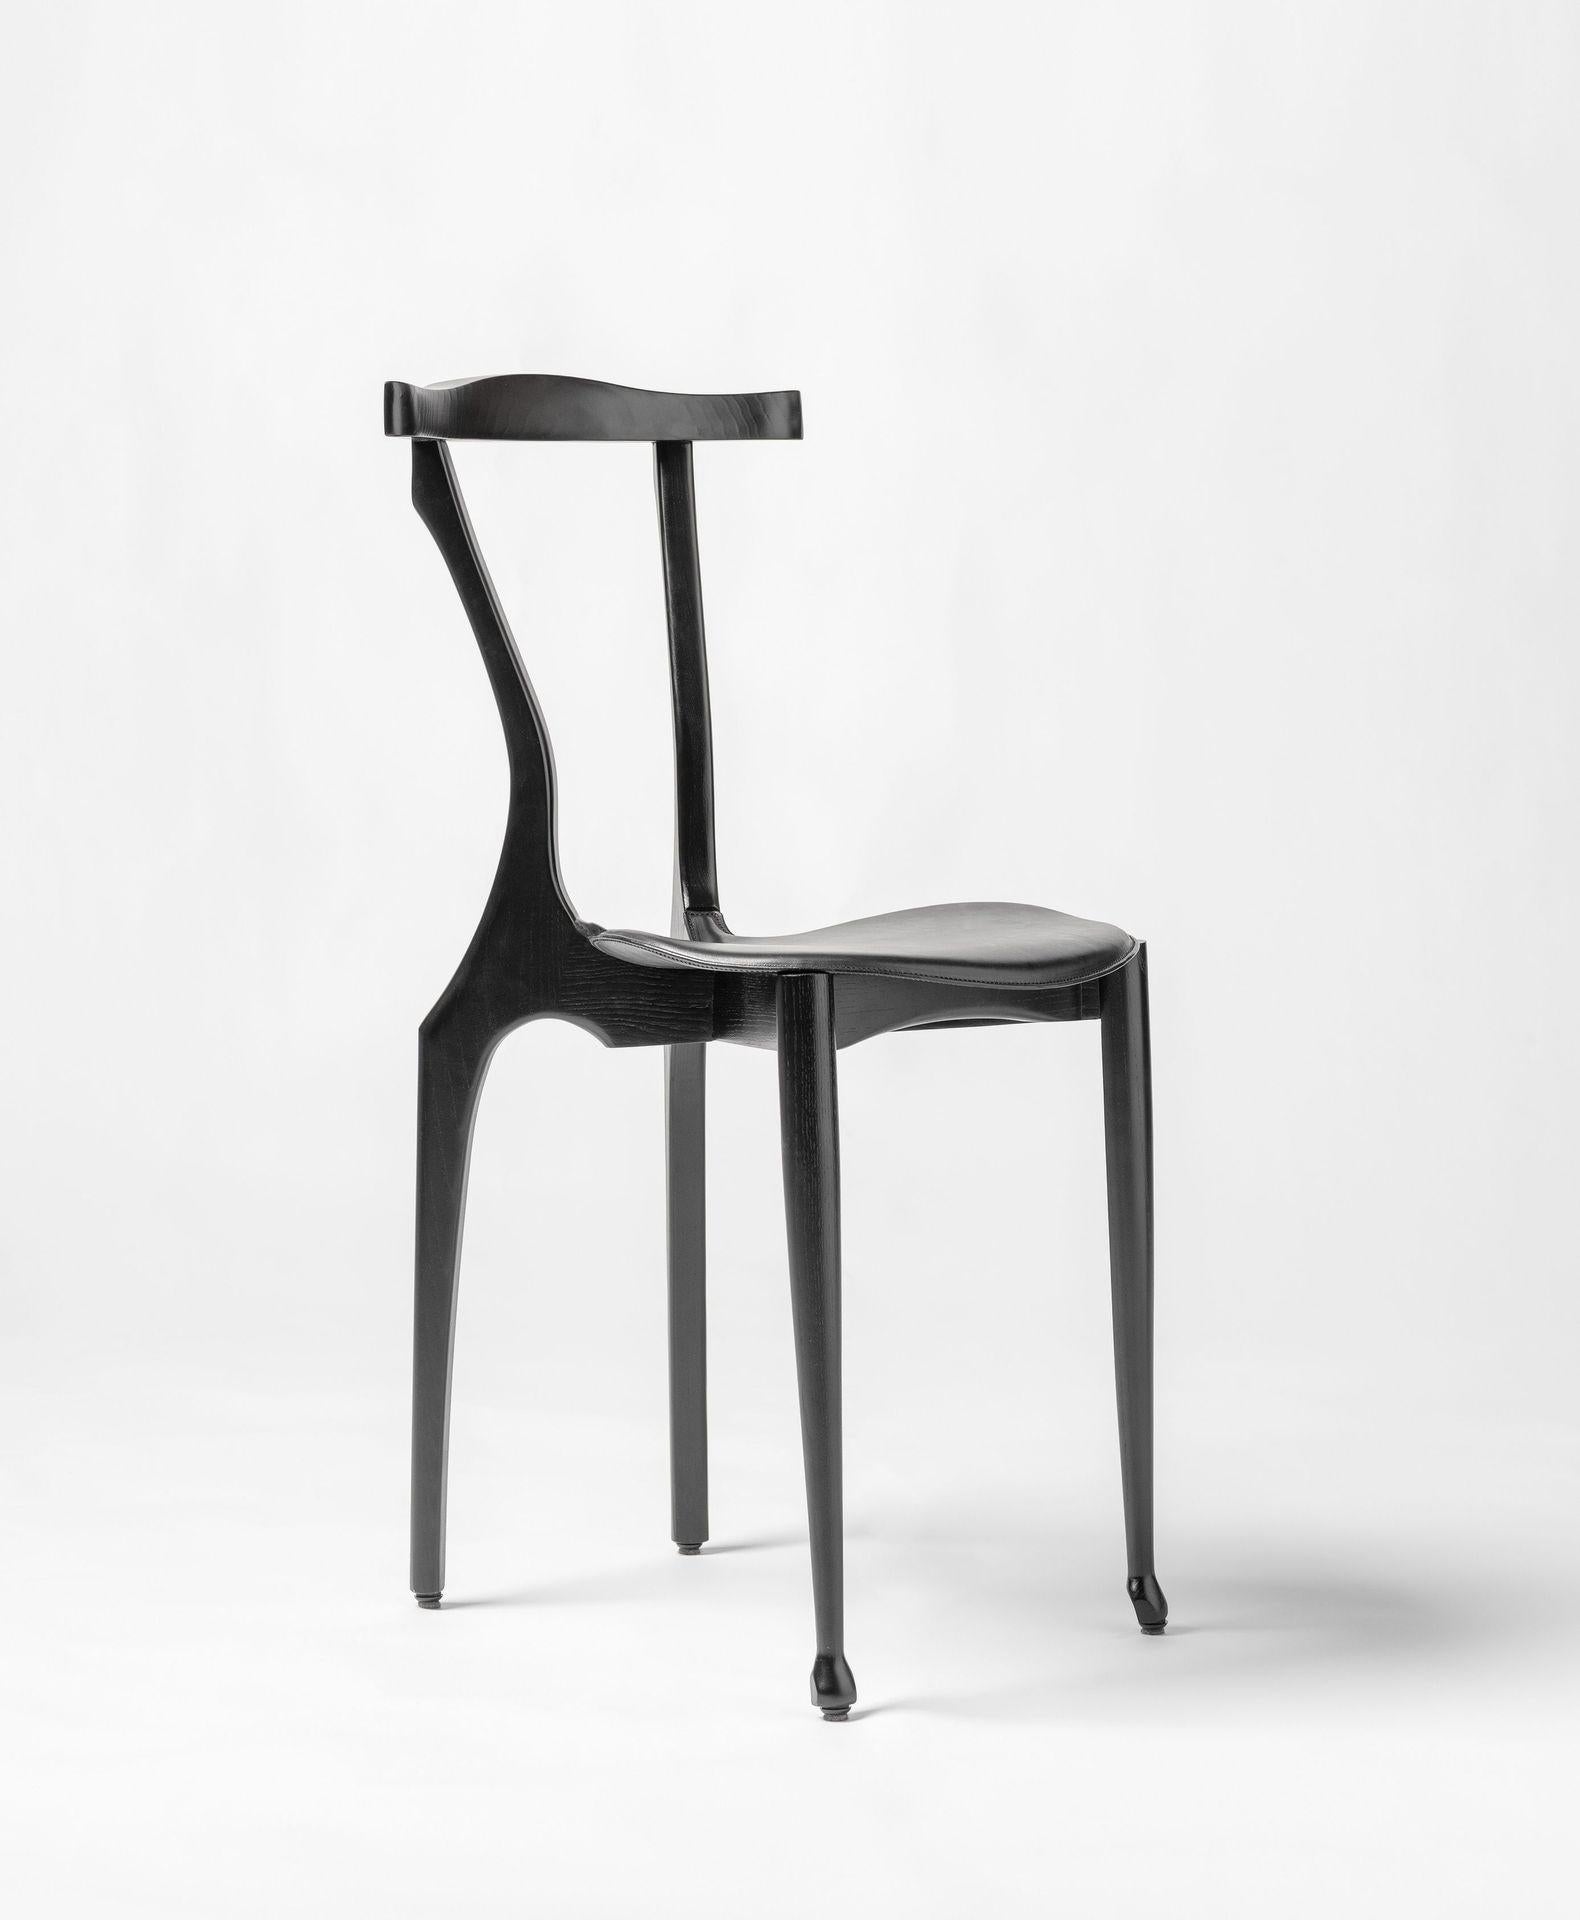 Spanish Gaulinetta Natural Chair by Oscar Tusquets For Sale